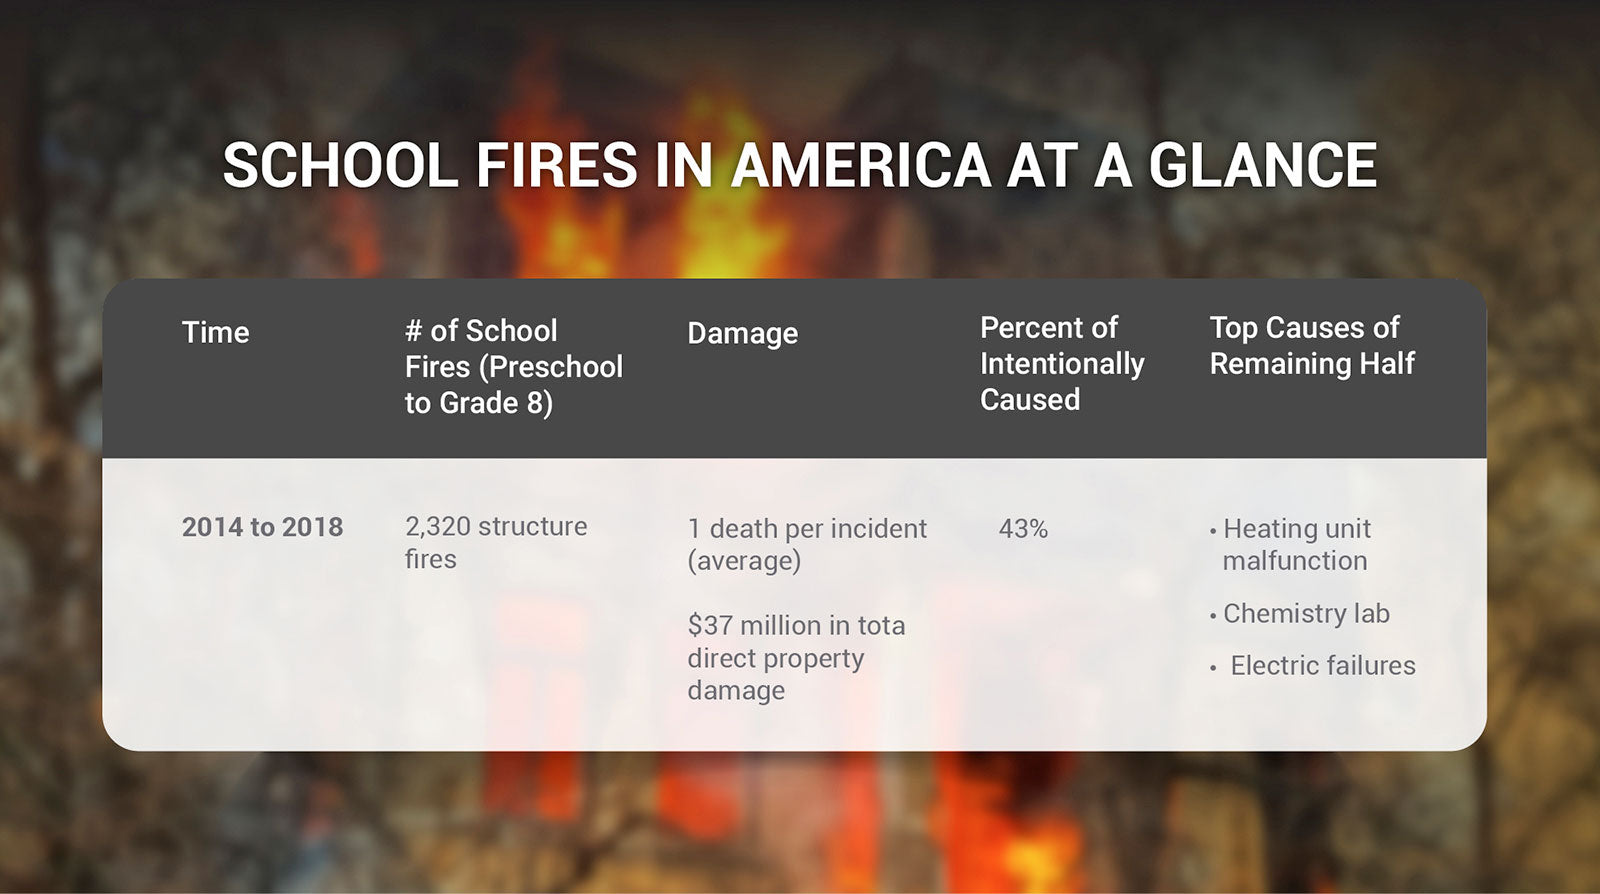 Table2: School Fires in America at a Glance